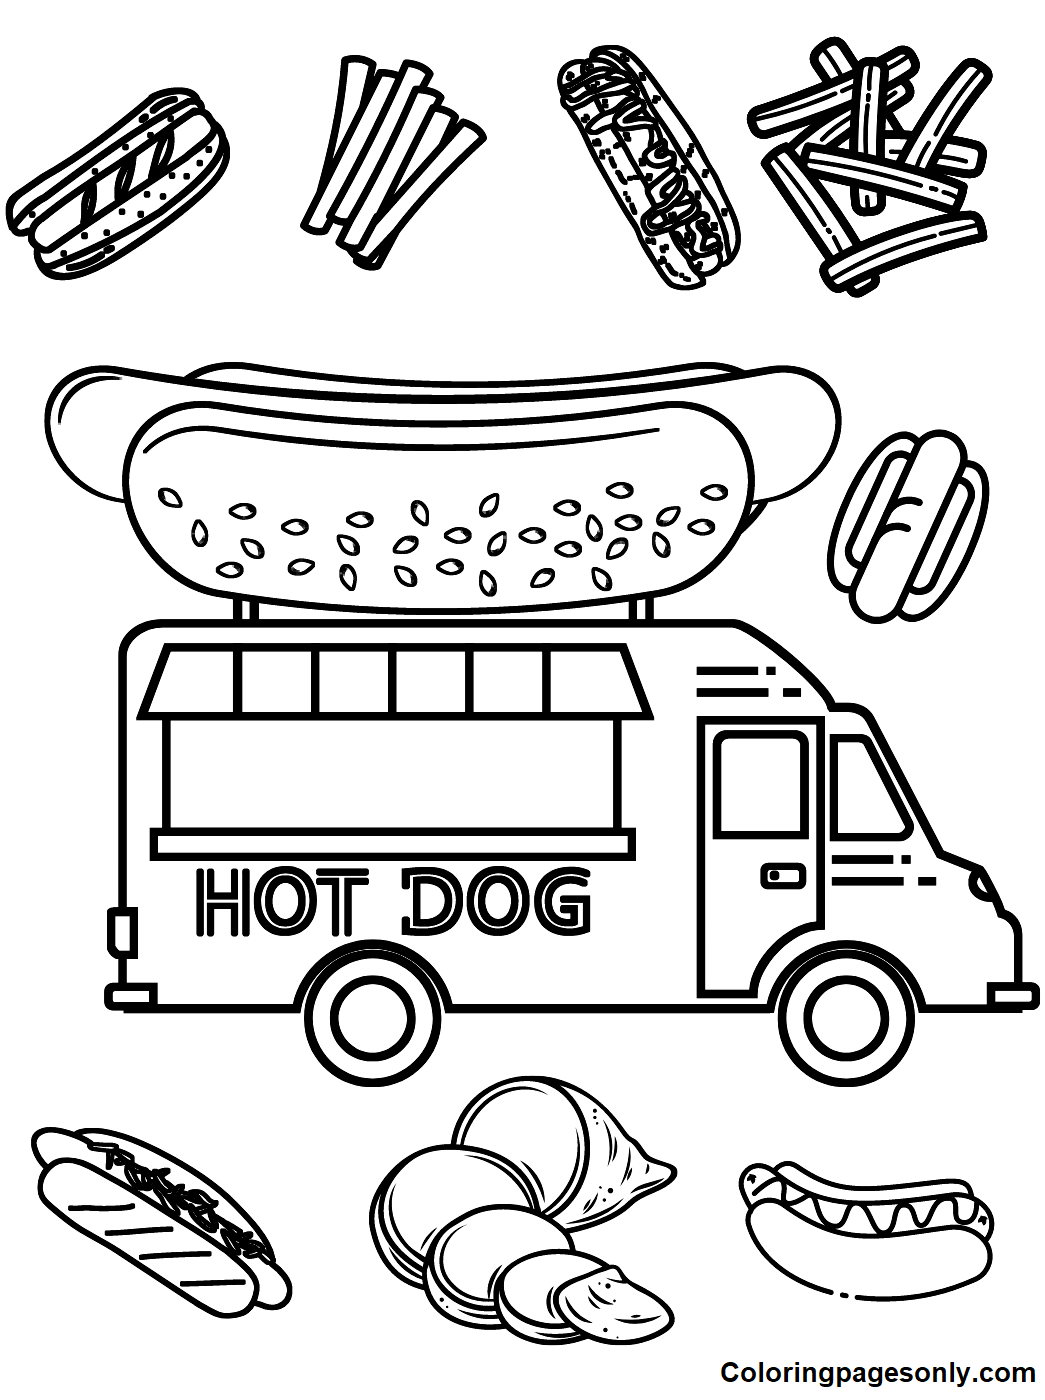 Hot Dog Food Truck Coloring Pages